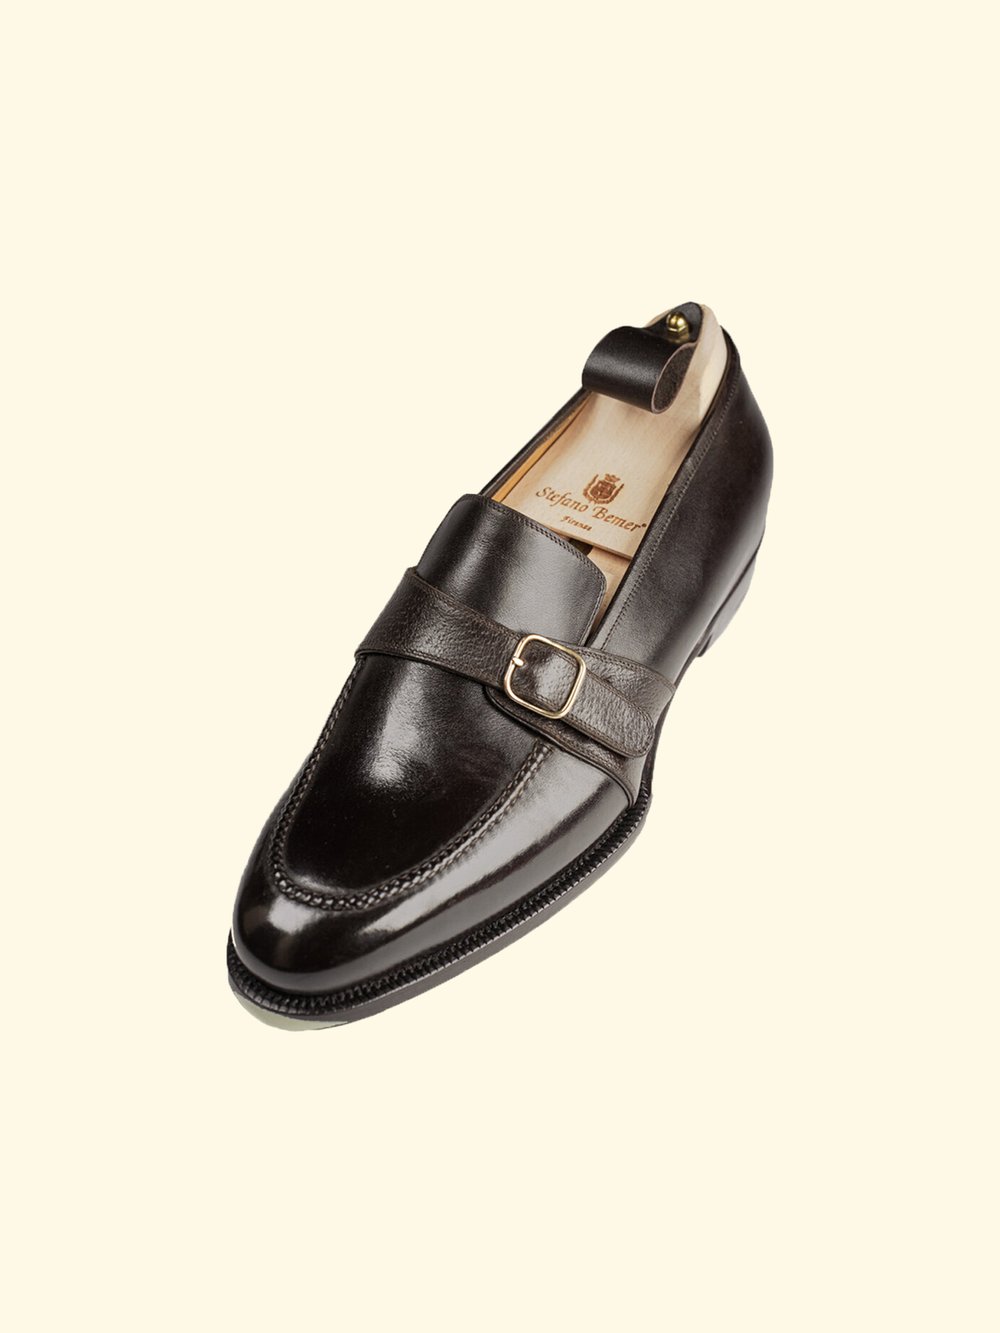 Khamai Loafers by Stefano Bember for The Anthology - Espresso